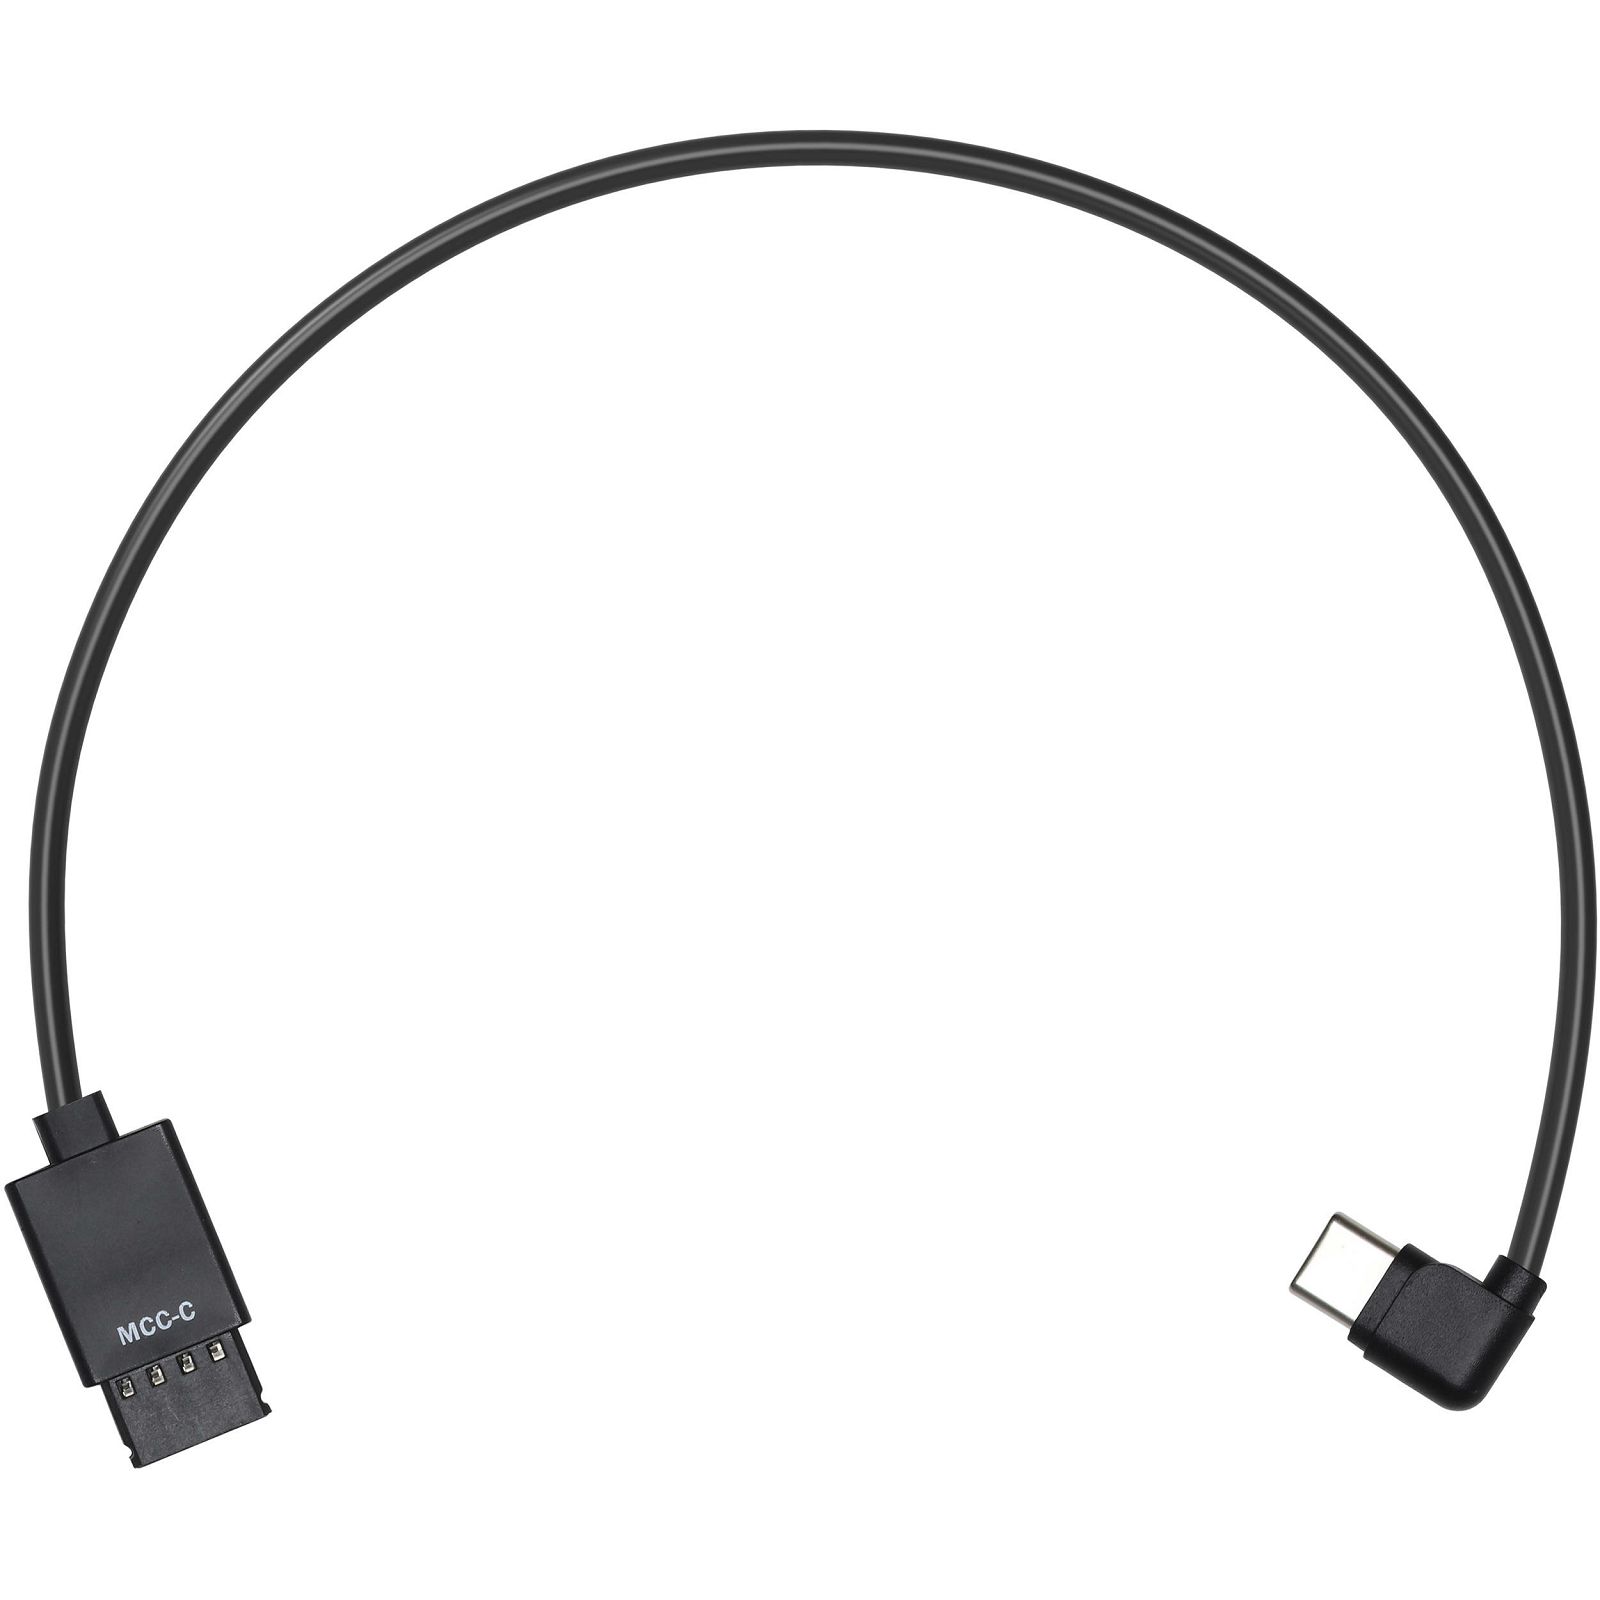 DJI Ronin-S Spare Part 05 Multi-Camera Control Cable Type-C (CP.RN.00000010.01)